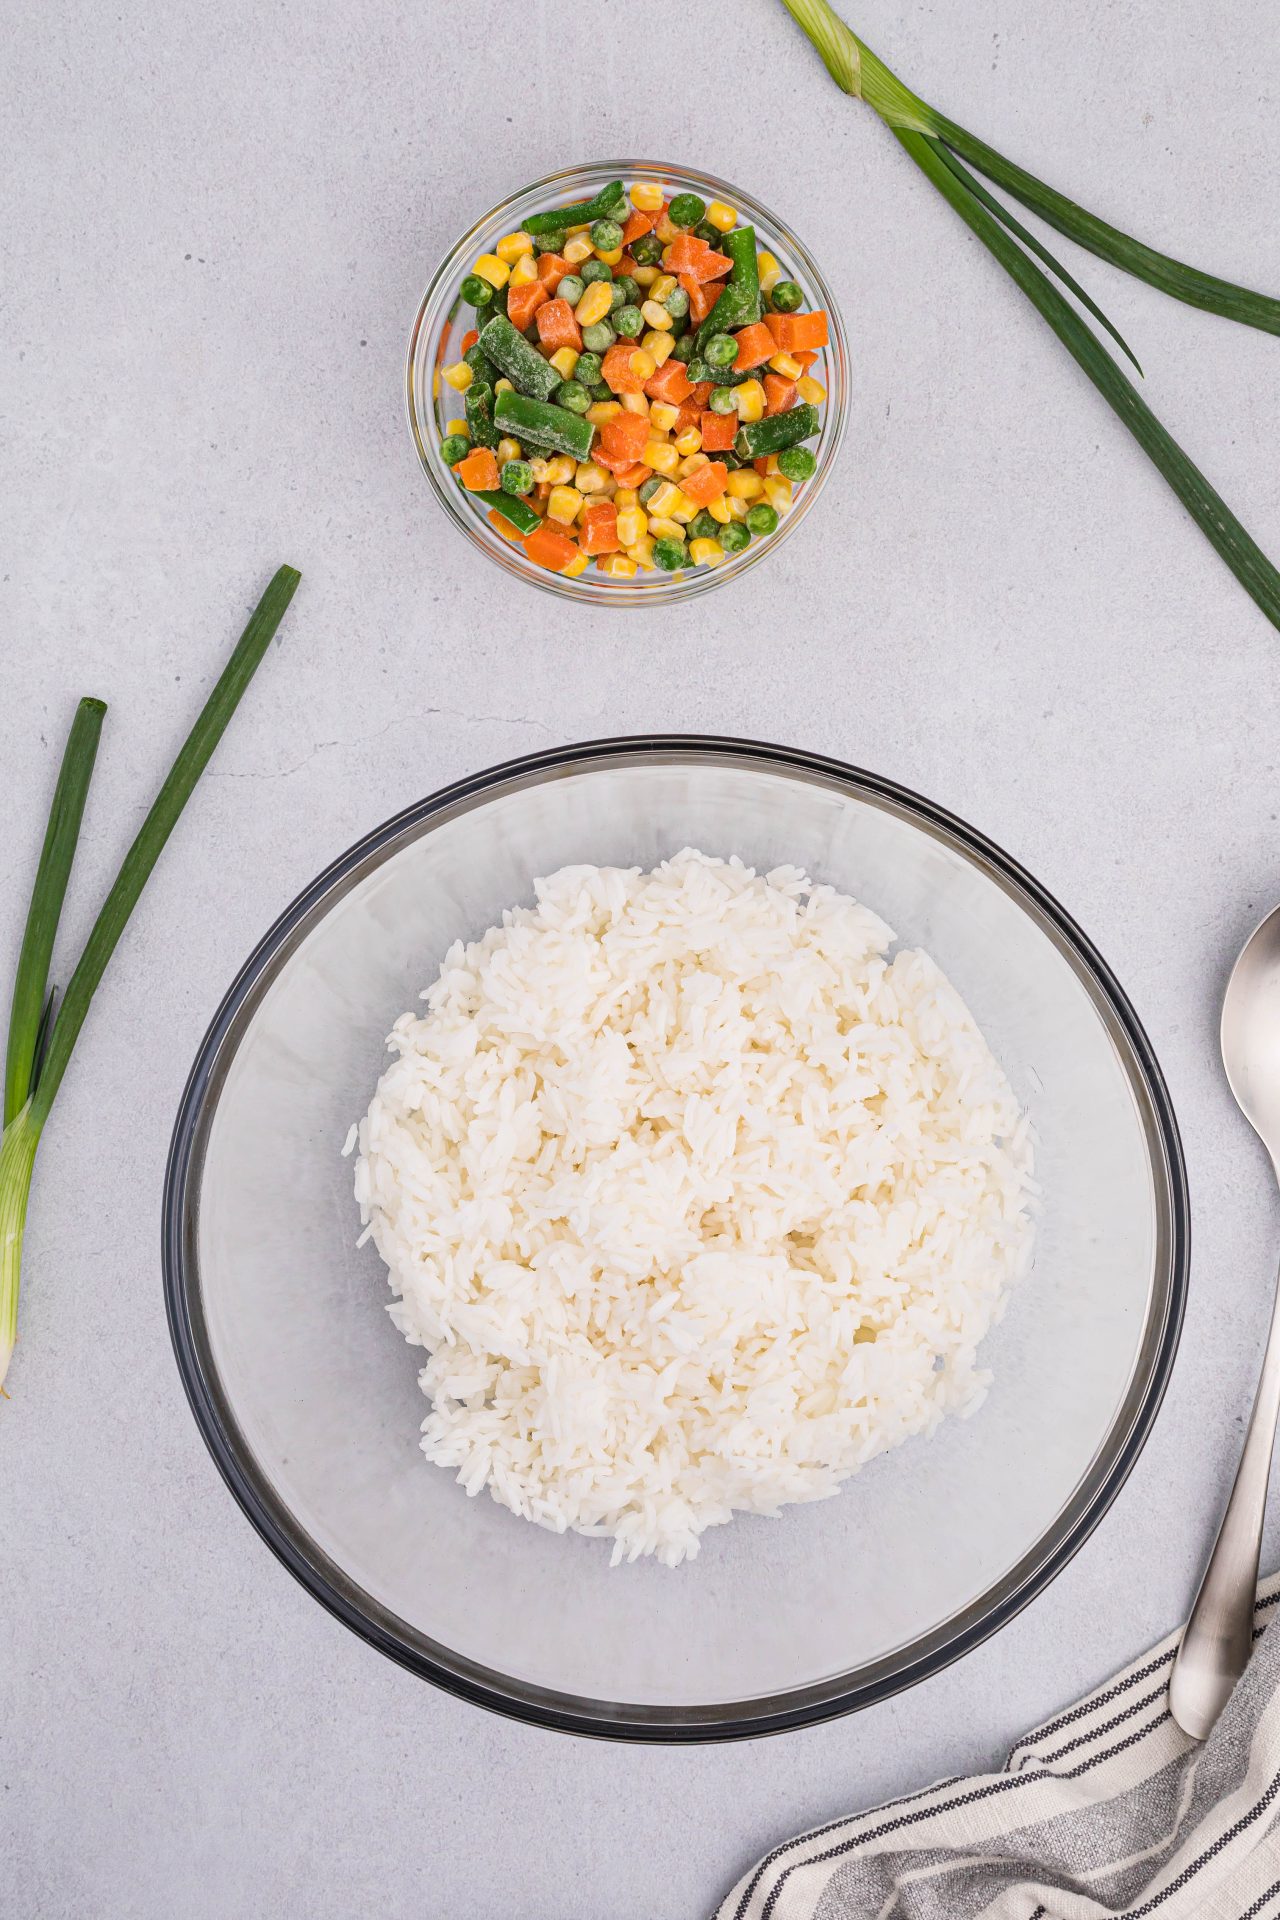 A large bowl of rice will be used to make air fryer fried rice. To the right of the bowl is a spoon, and a glass bowl of mixed vegetables is above the rice bowl.